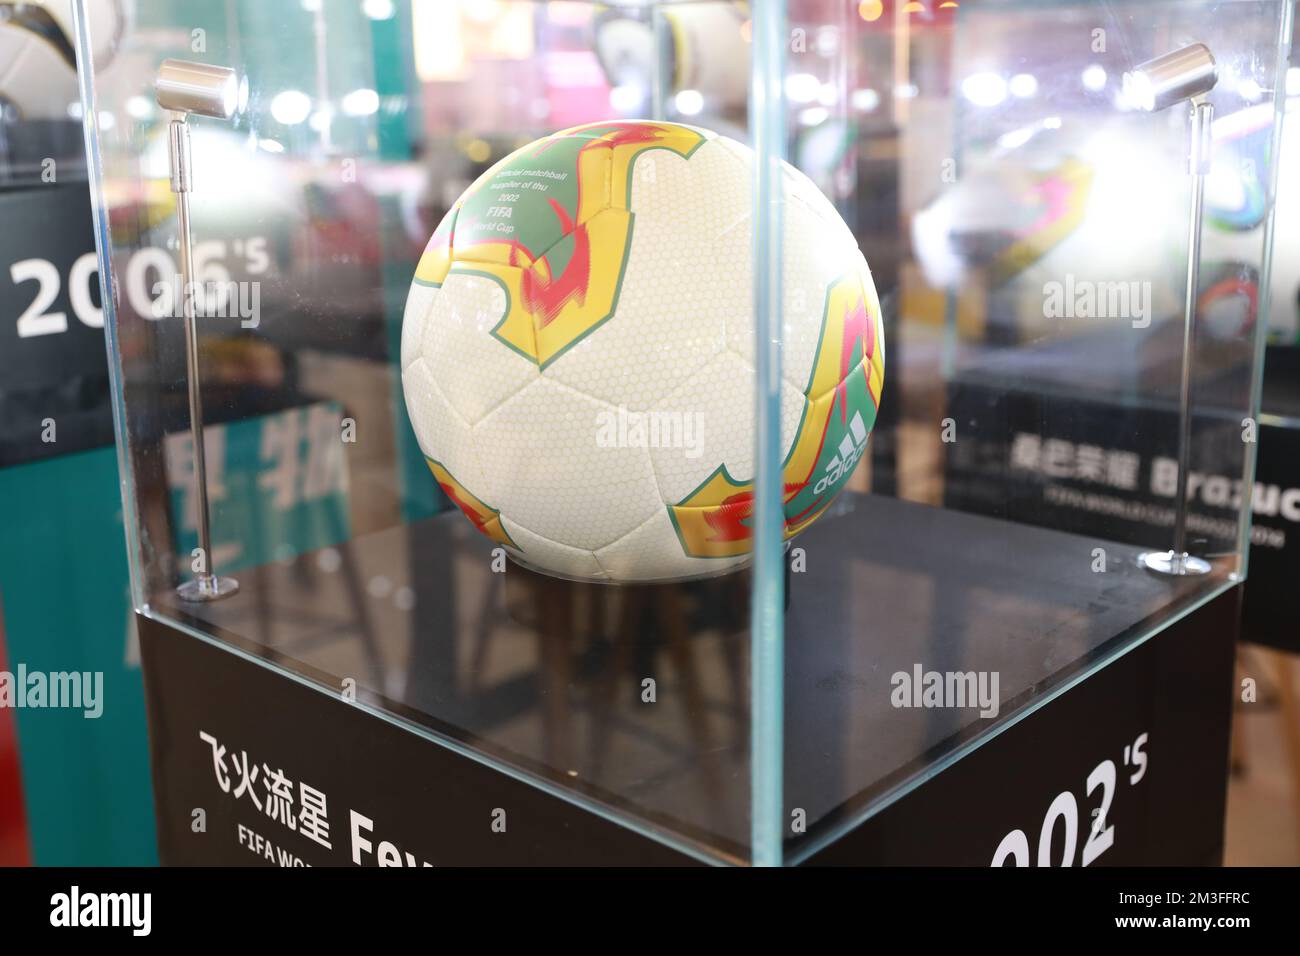 XI'AN, CHINA - DECEMBER 14, 2022 - The 2002 Korea-Japan World Cup soccer Fevernova is displayed at a shopping mall in Xi 'an, Shaanxi province, China, Stock Photo